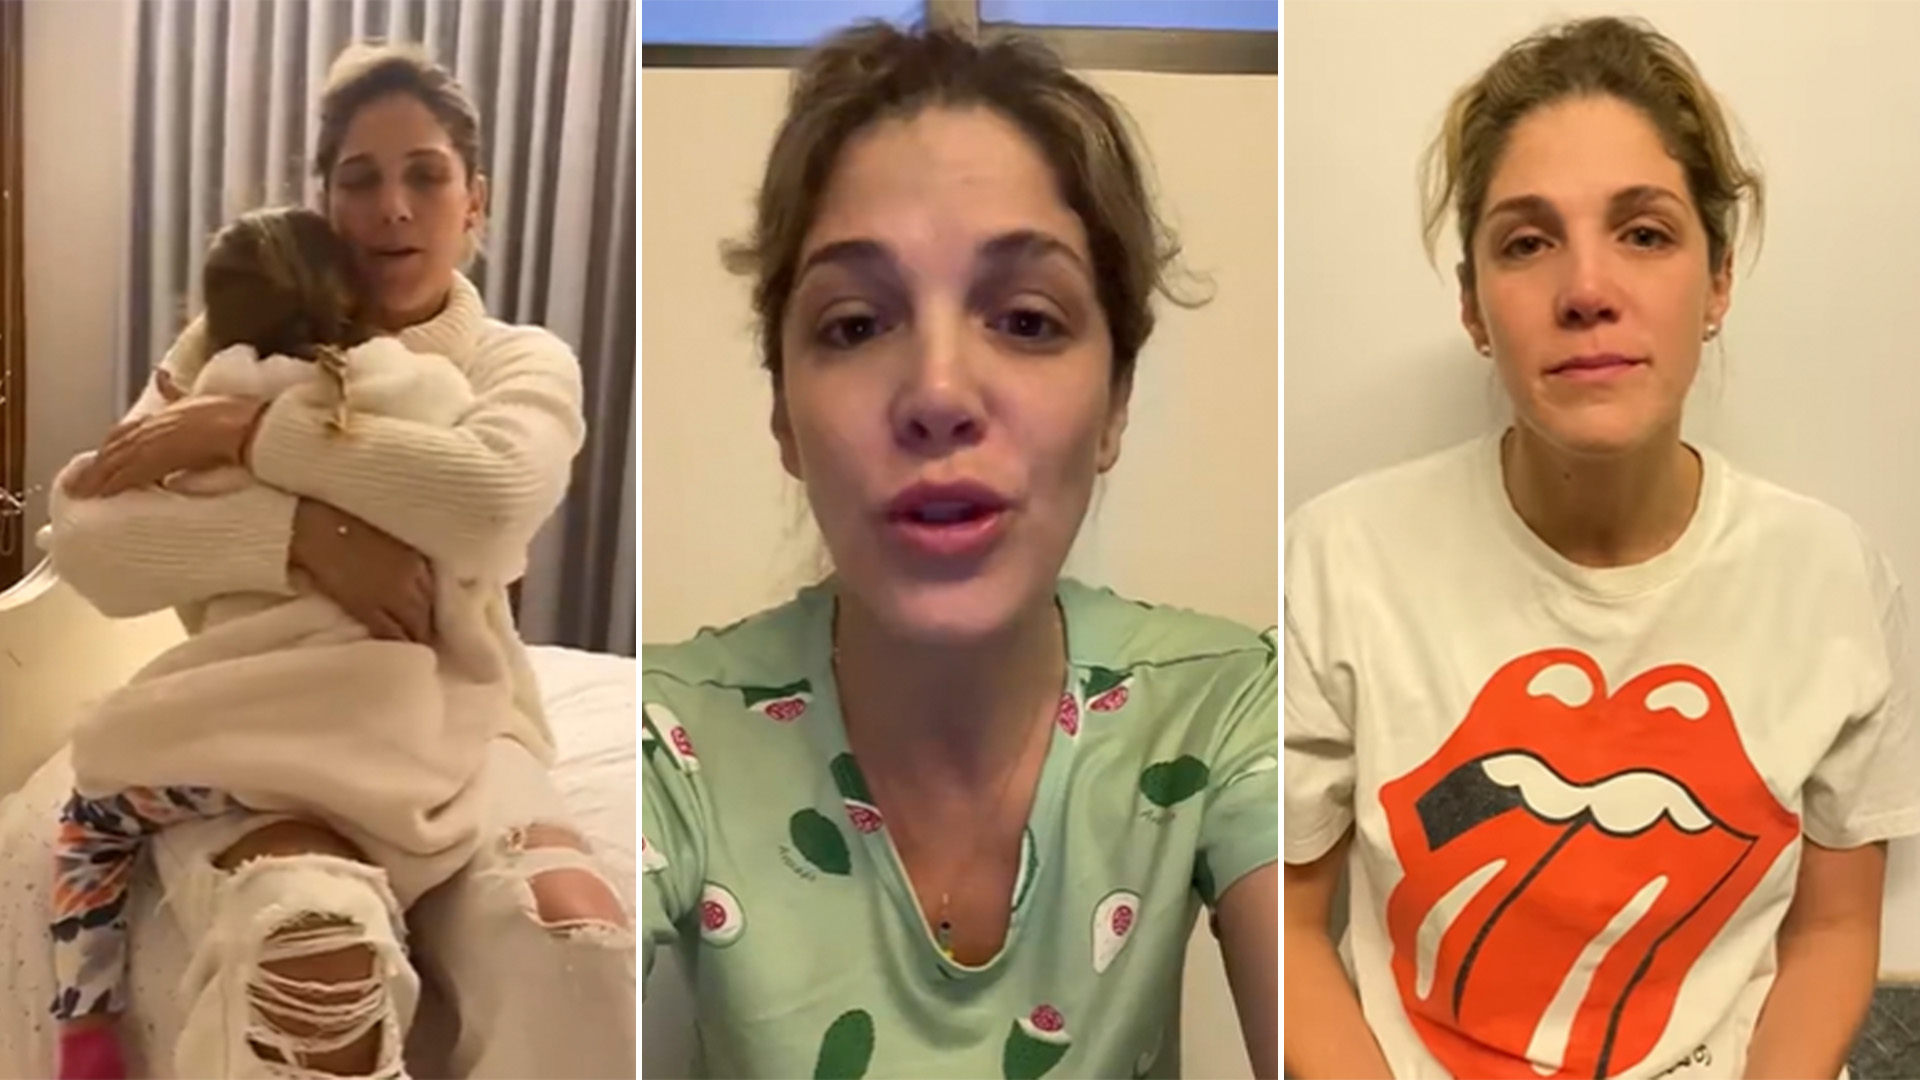 The former participant of several reality shows pointed out that even her daughters have been victims of abuse Screenshots: Instagram/@nataliaalcoceroficial